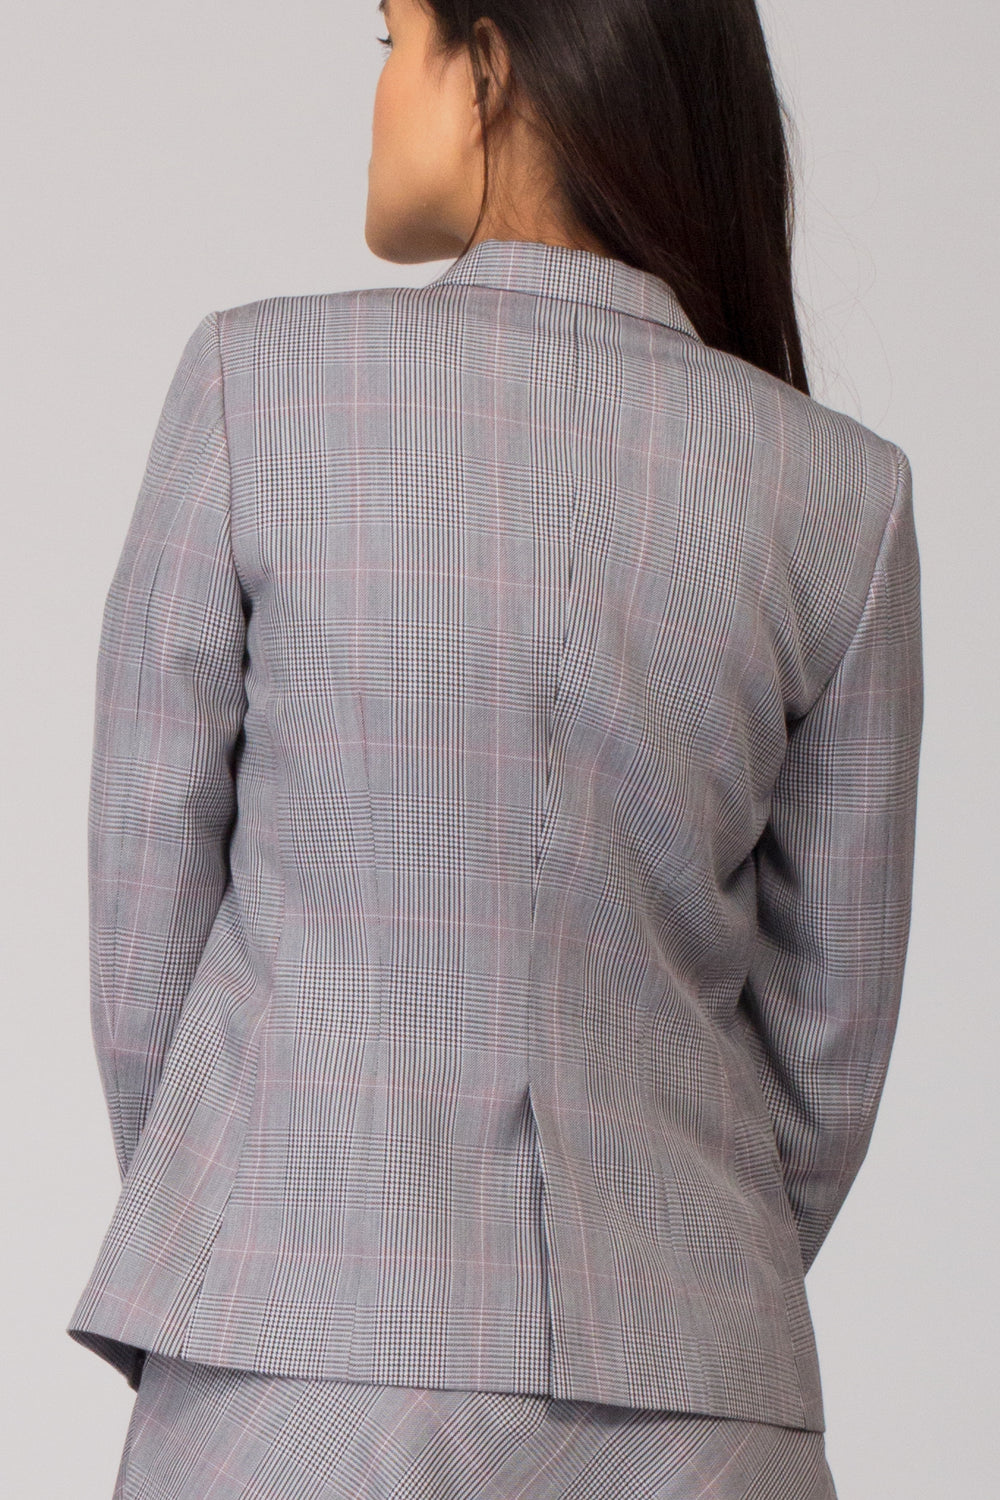 Grey Formal Blazer Suit for Working Women. Shop for stylish office suits and professional looks at www.intermod.in